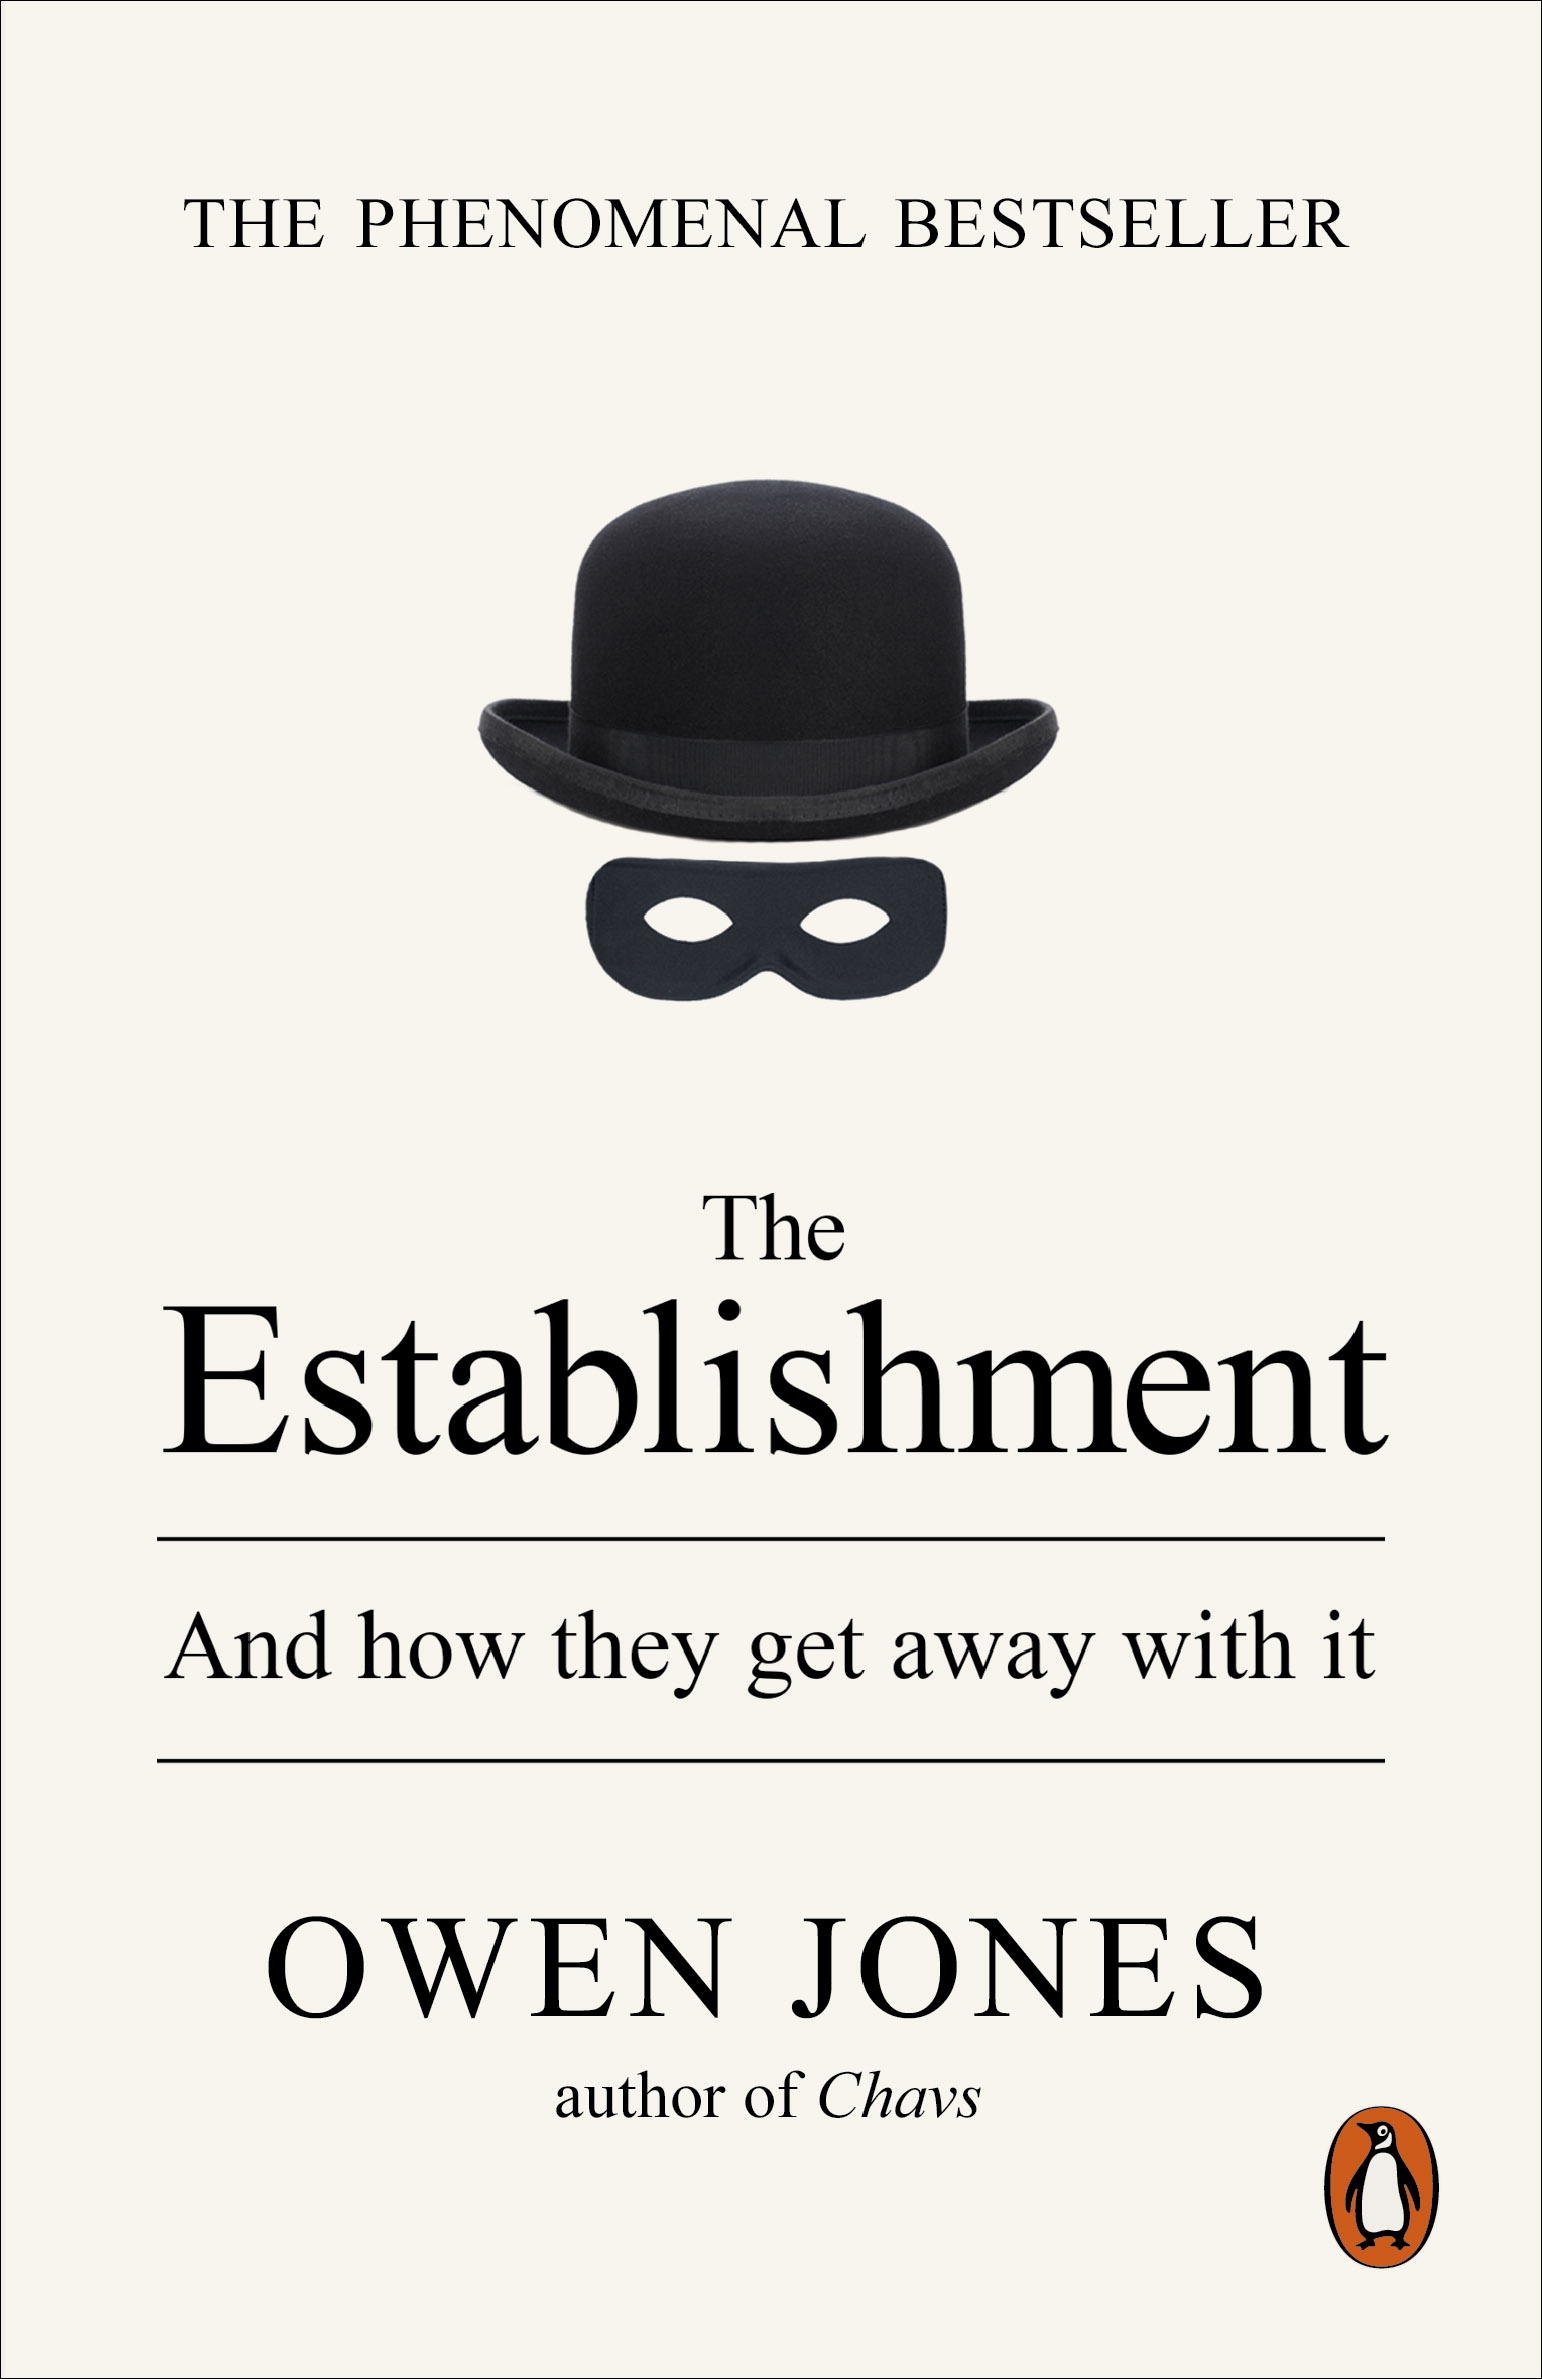 The Establishment: And how they get away with it - Owen Jones